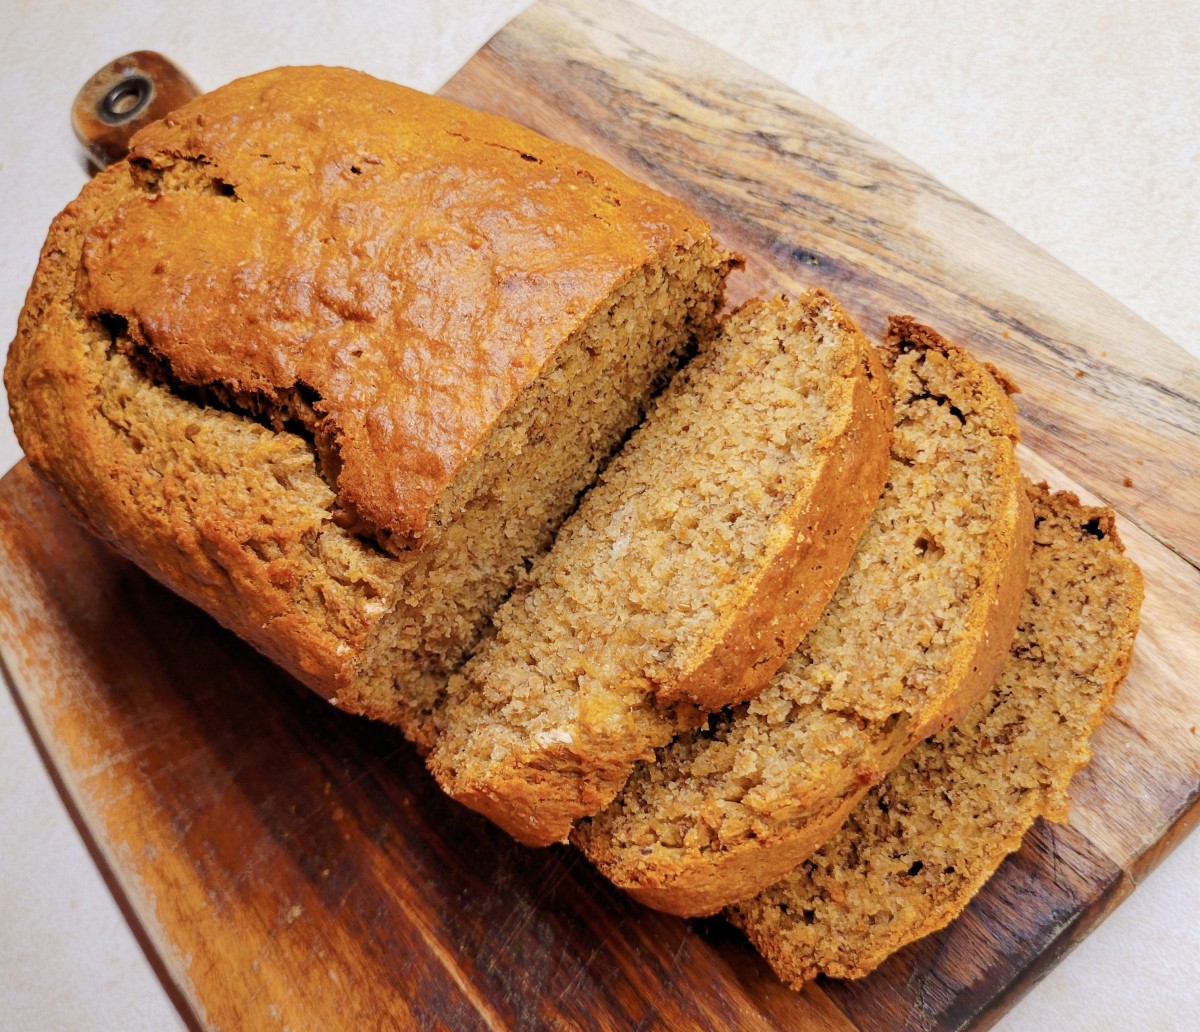 This dairy-free banana bread is so moist and flavourful!